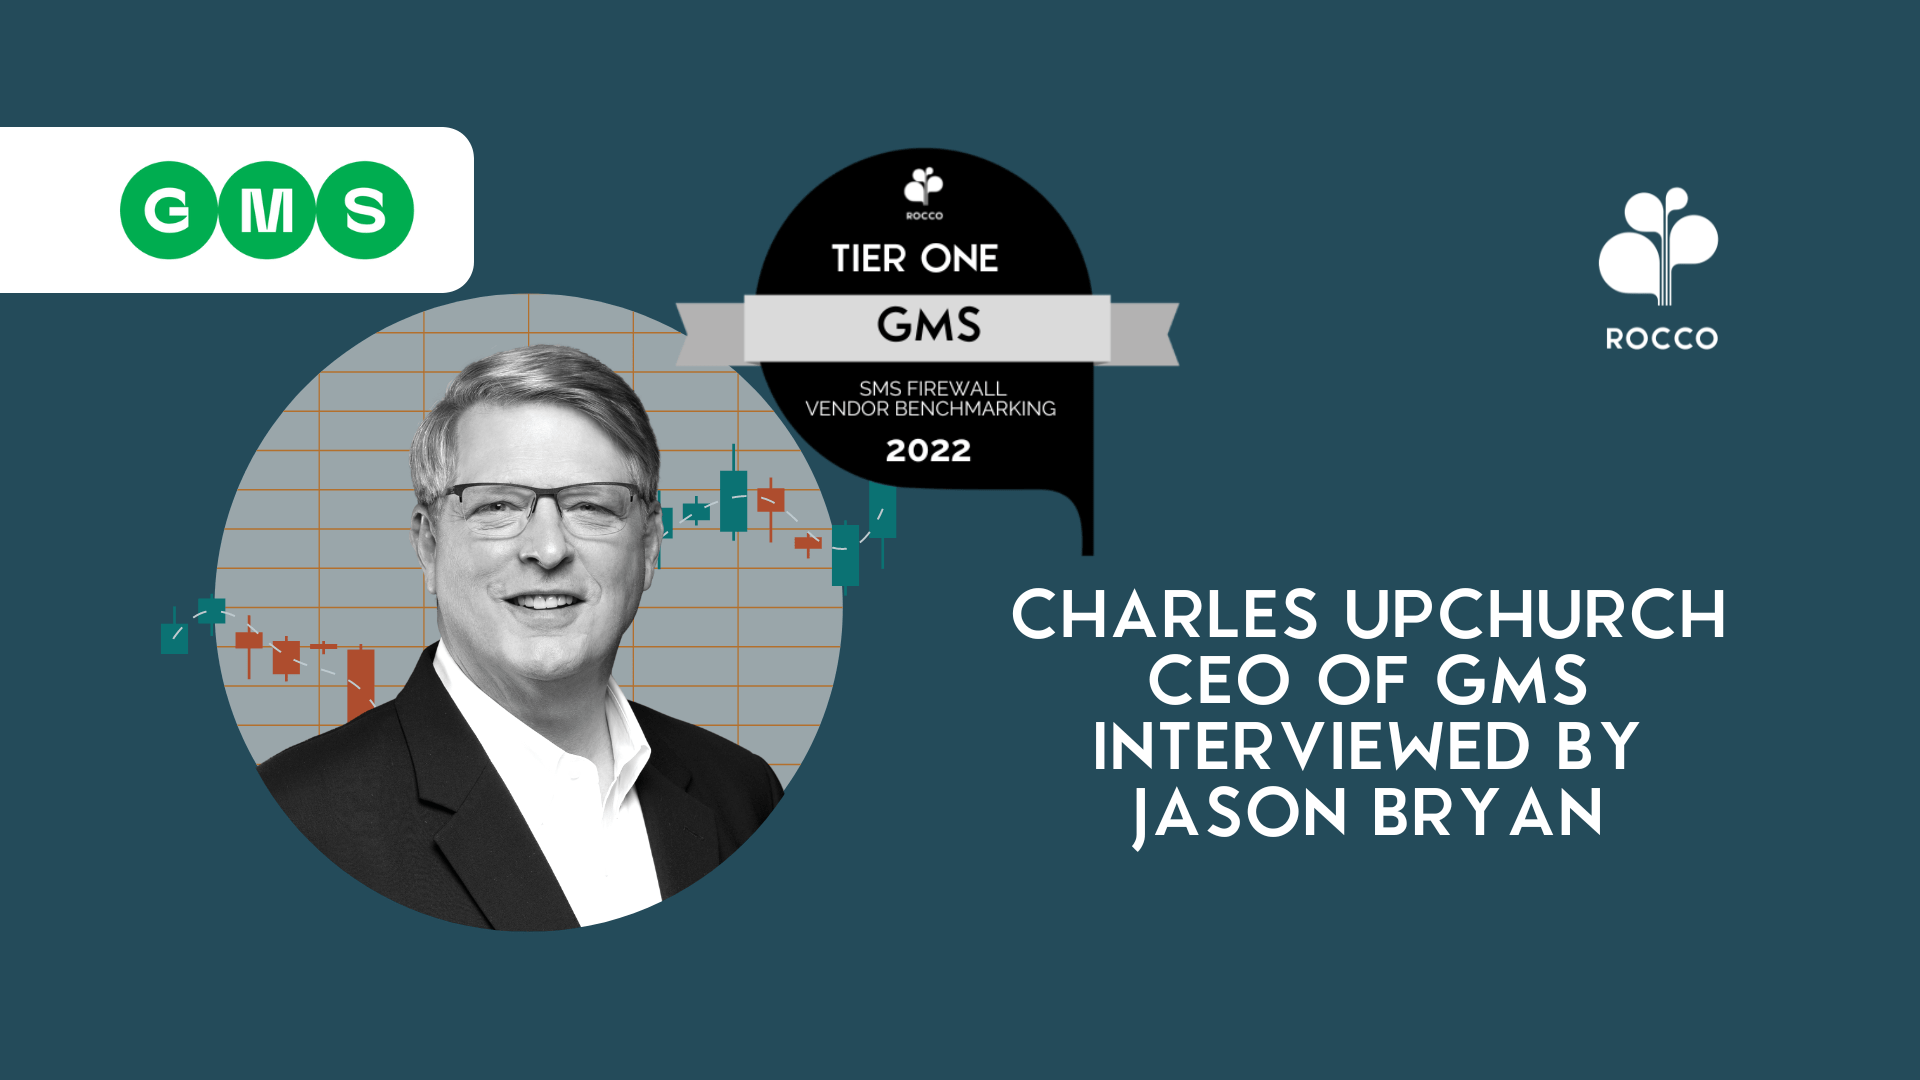 Charles Upchurch, CEO of GMS interviewed by Jason Bryan